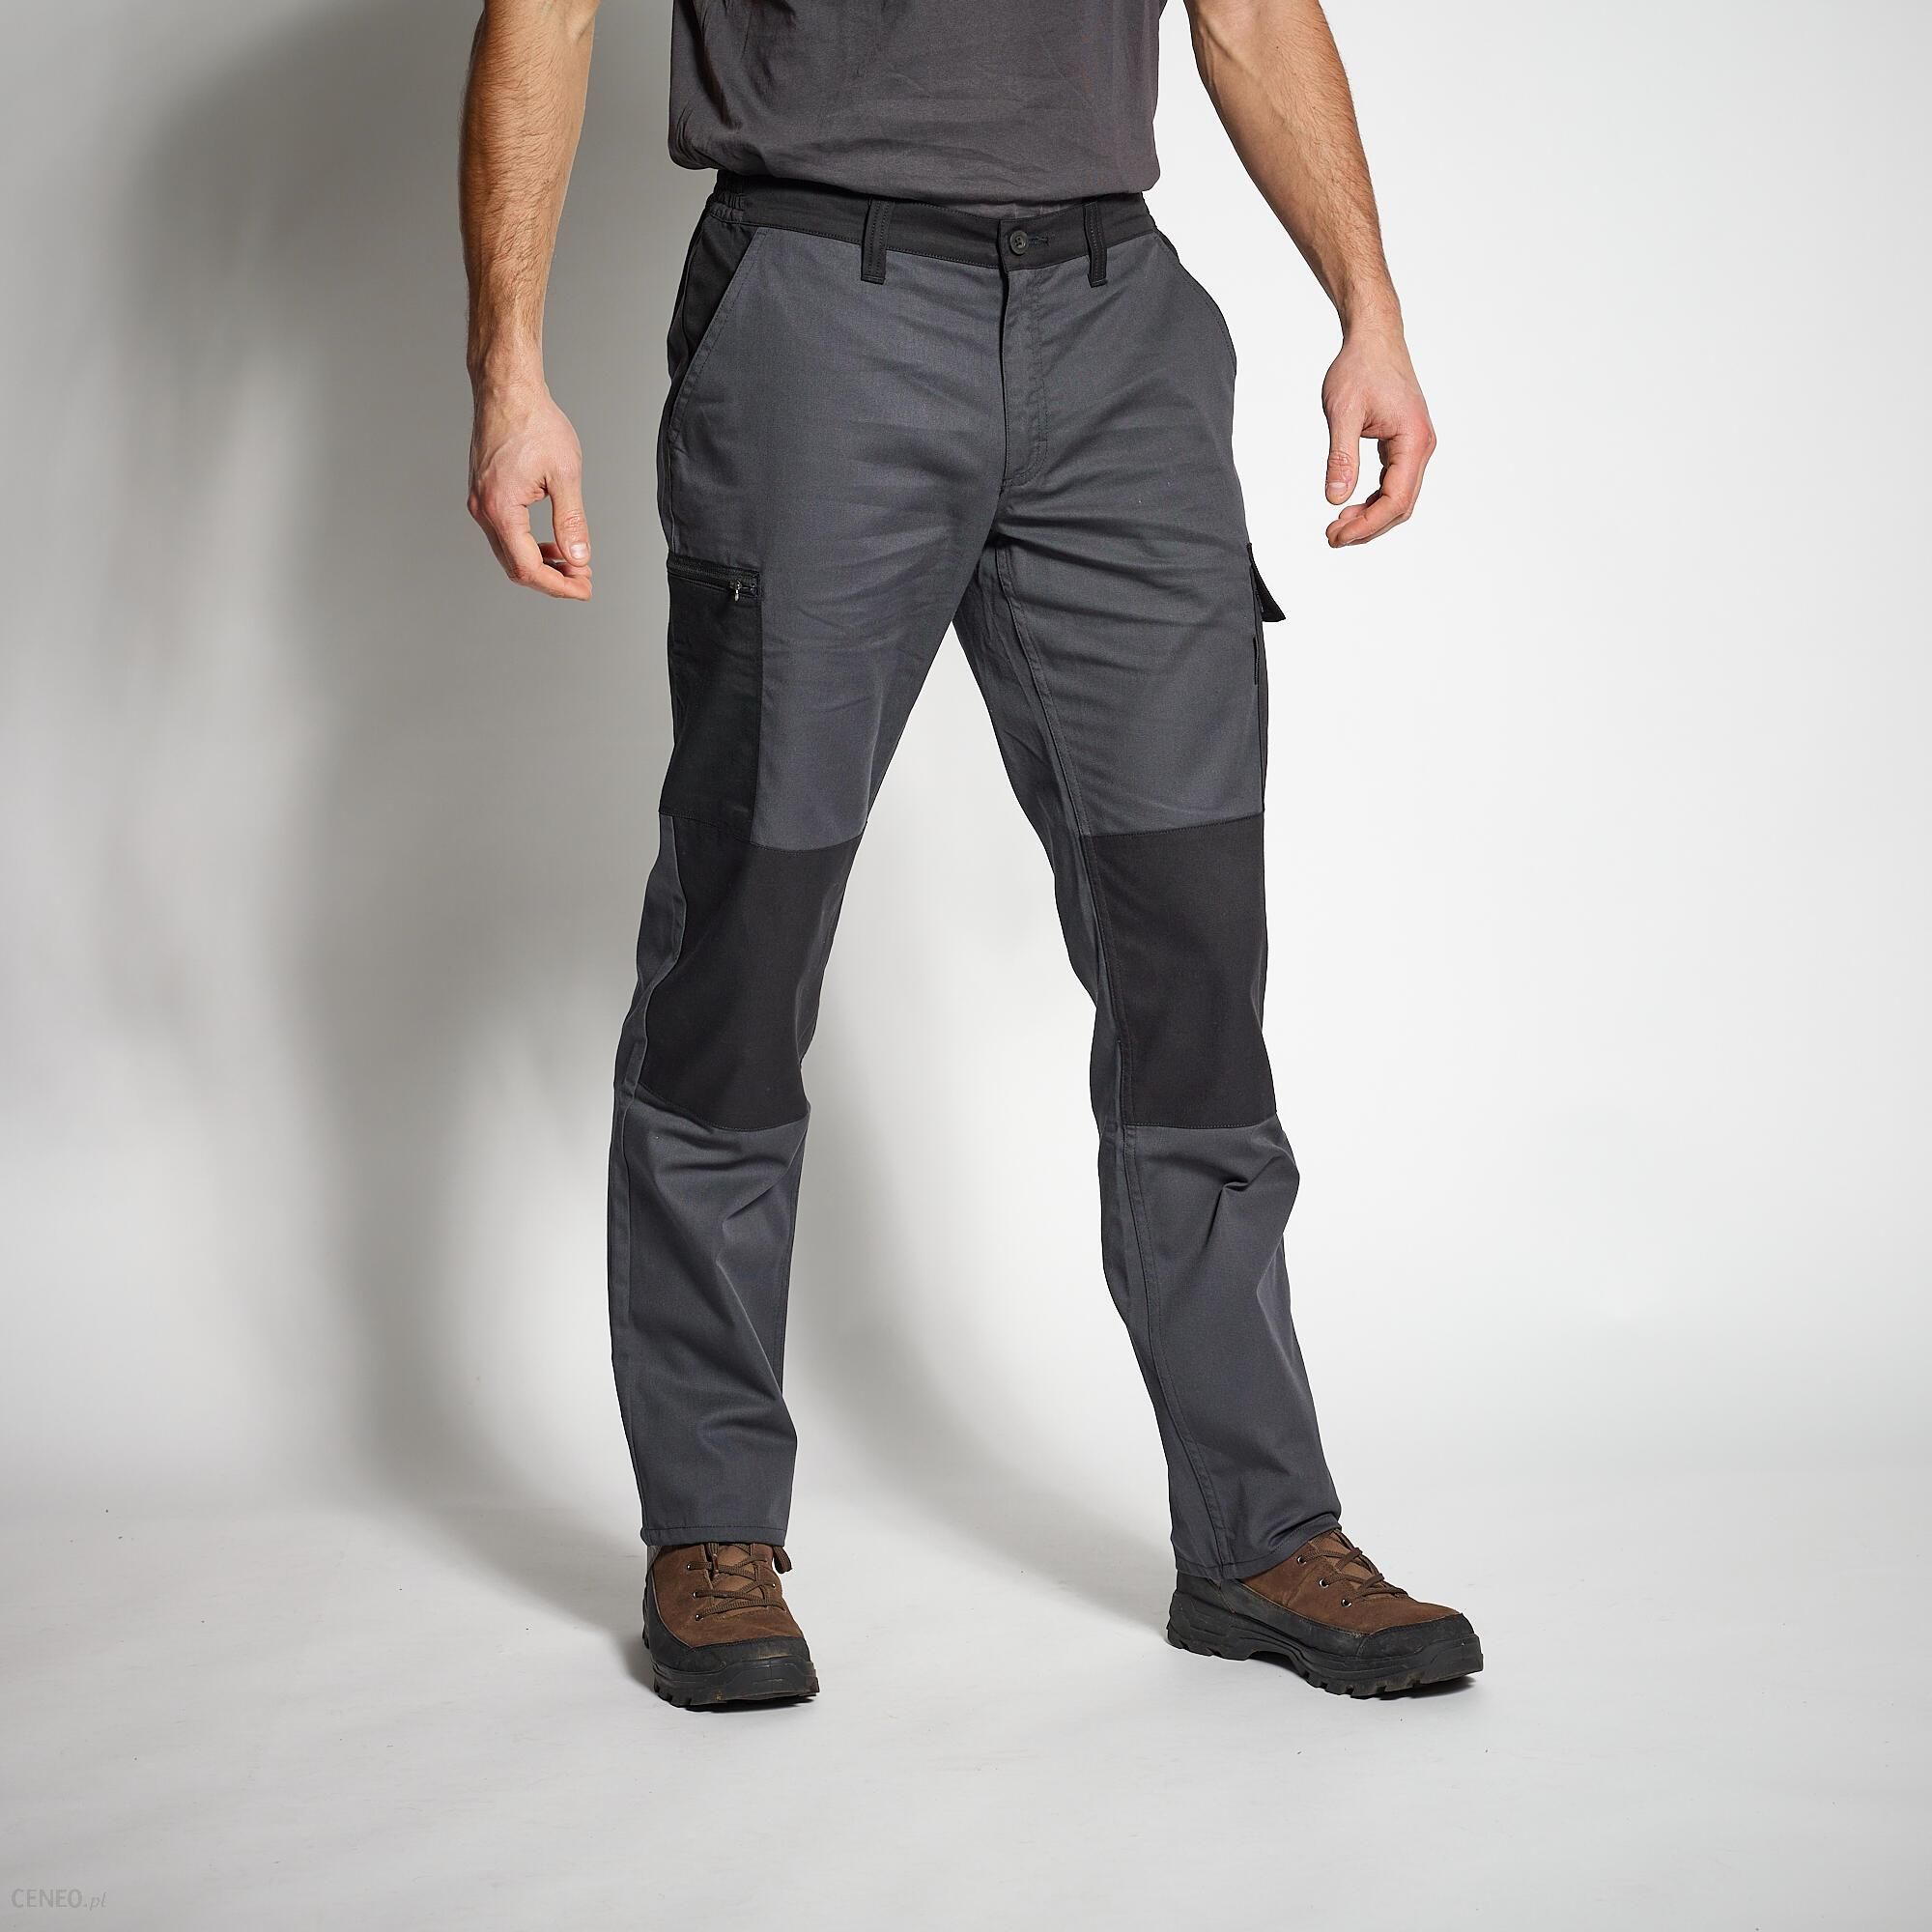 Buy Solognac Steppe 300 Hunting Trousers - Grey (L) Online at Low Prices in  India - Amazon.in